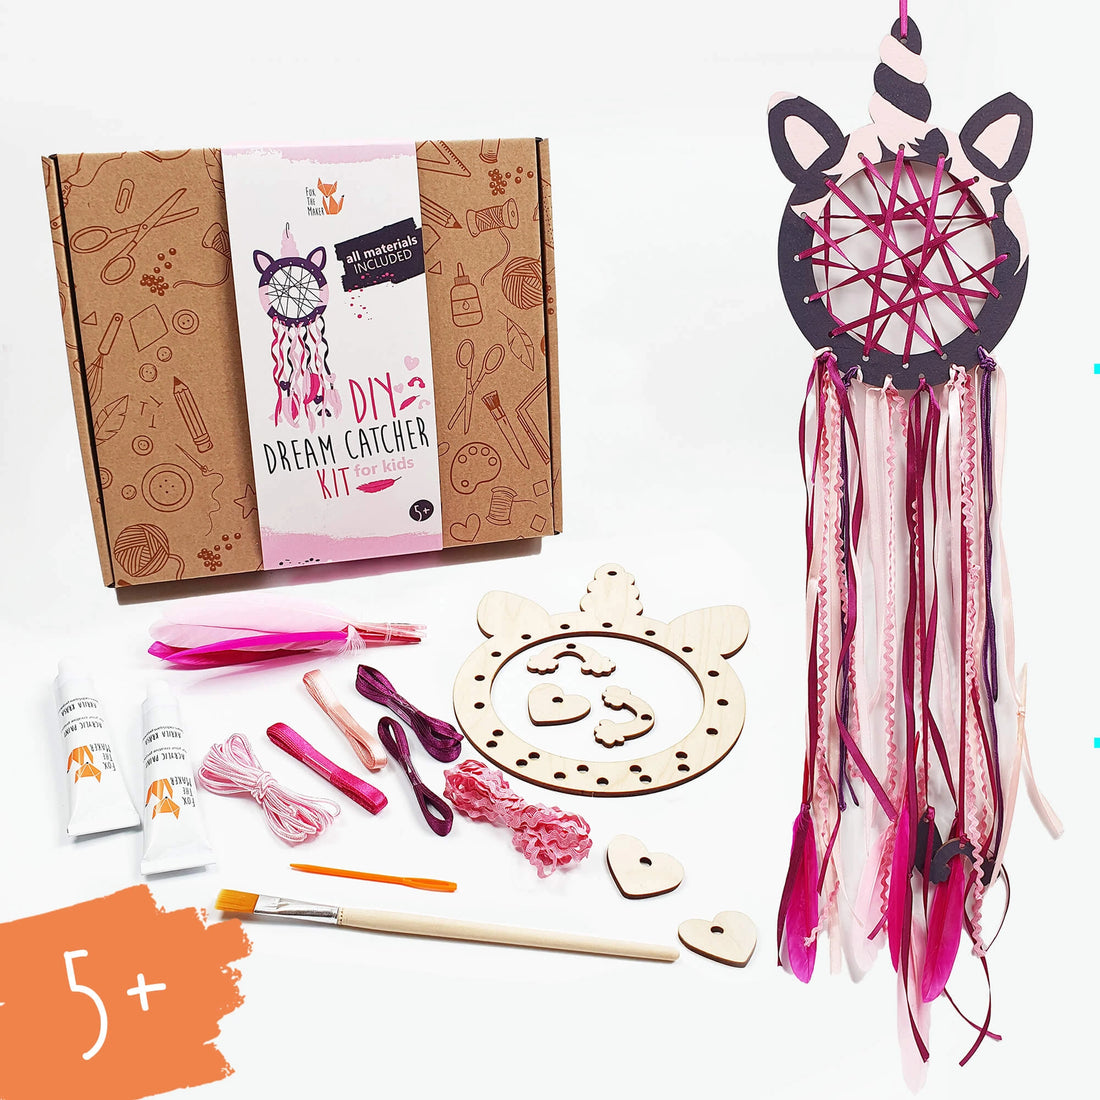 DIY Dream Catcher Kit, Crafts Kit for Teens and Kids, Craft Kit